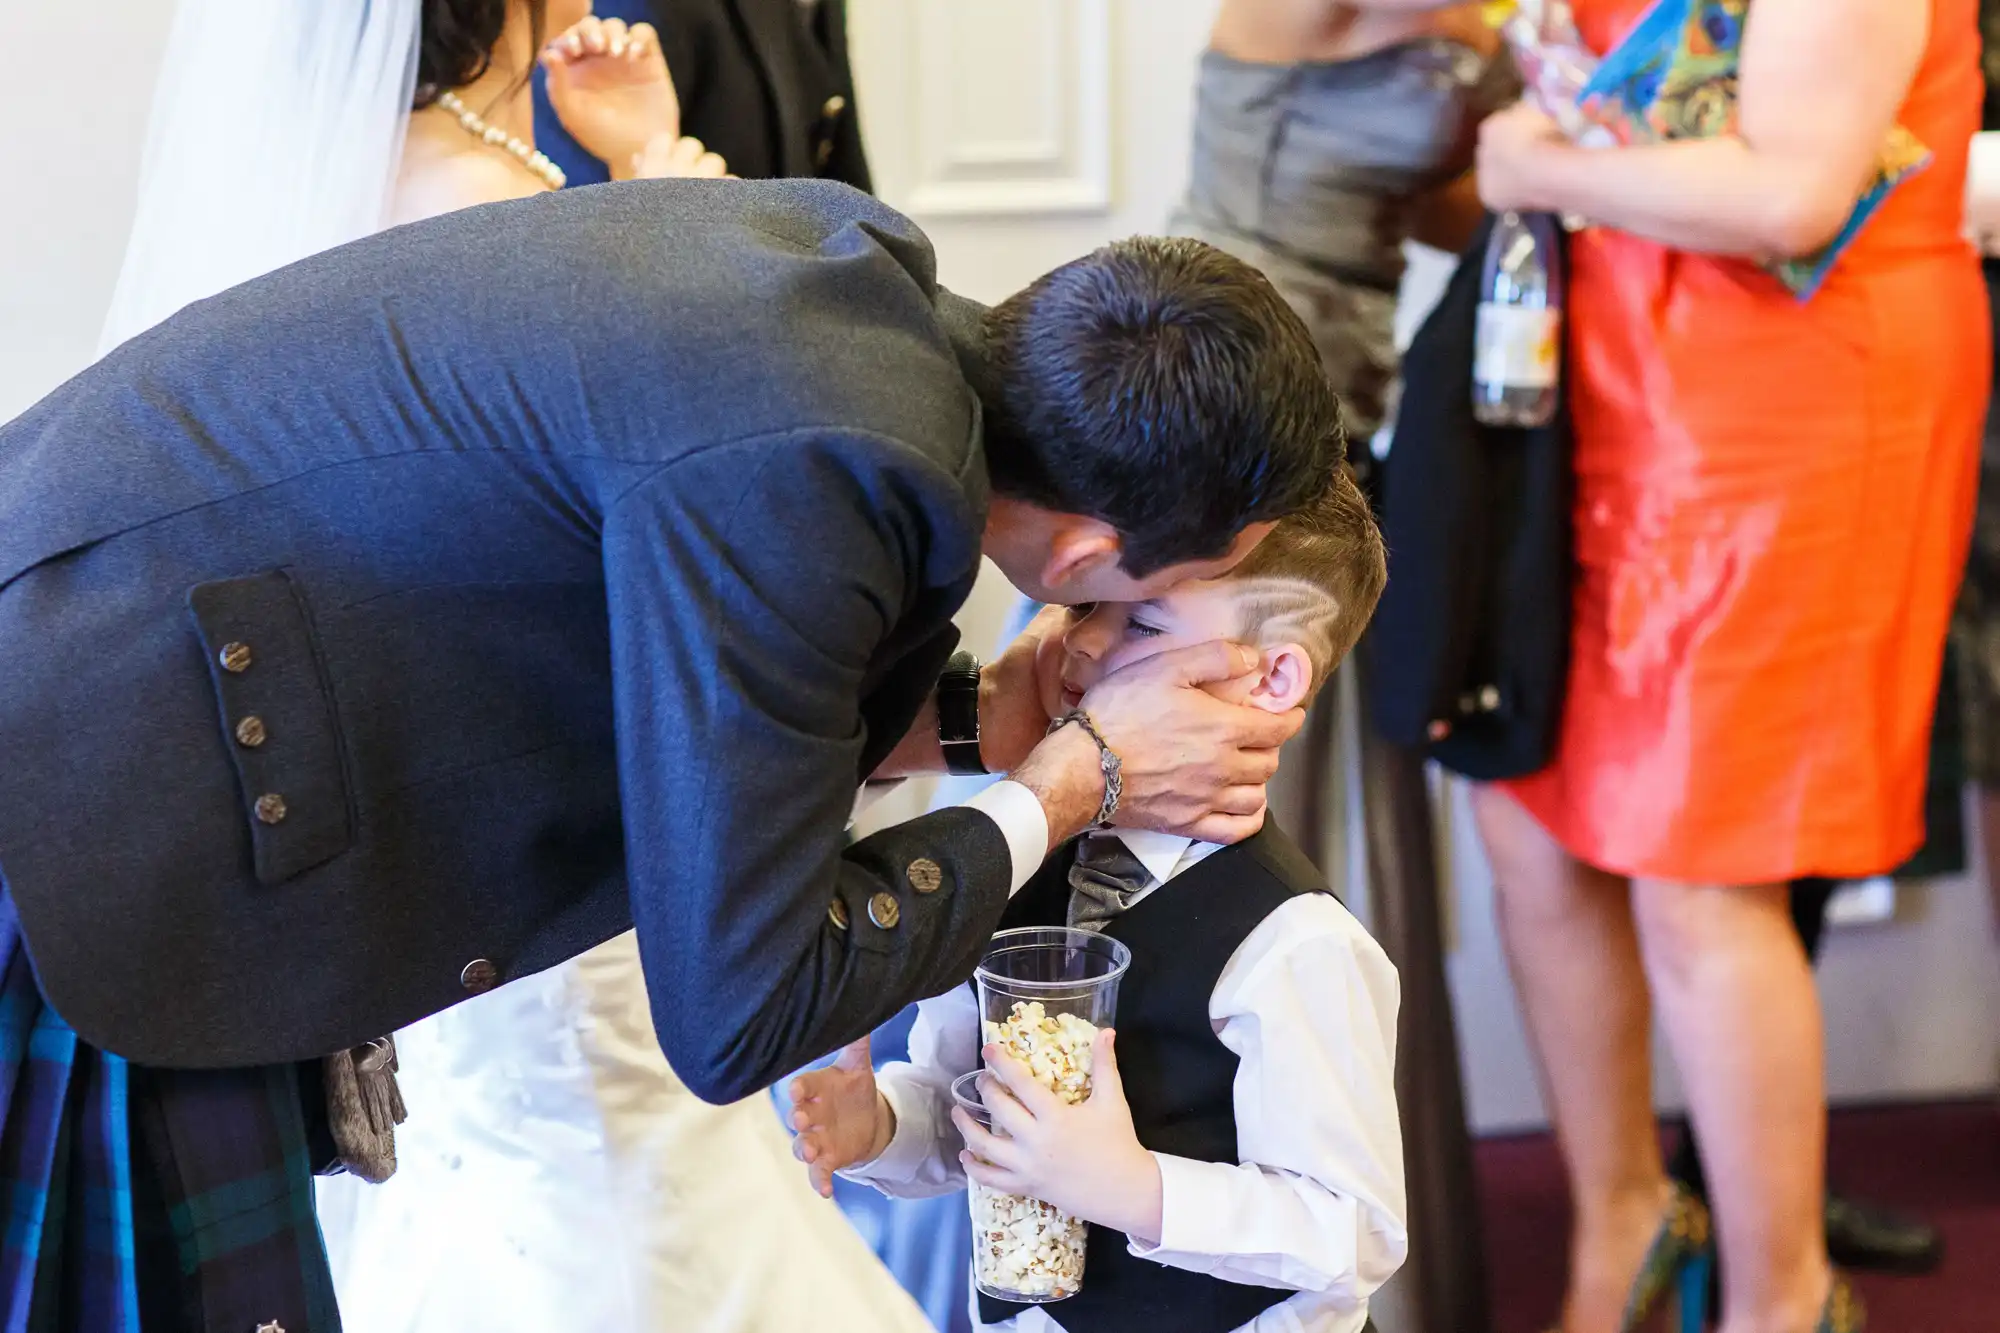 A man in a suit kisses a young boy on the forehead at a formal gathering, while the boy holds a cup of popcorn. people in the background are conversing.